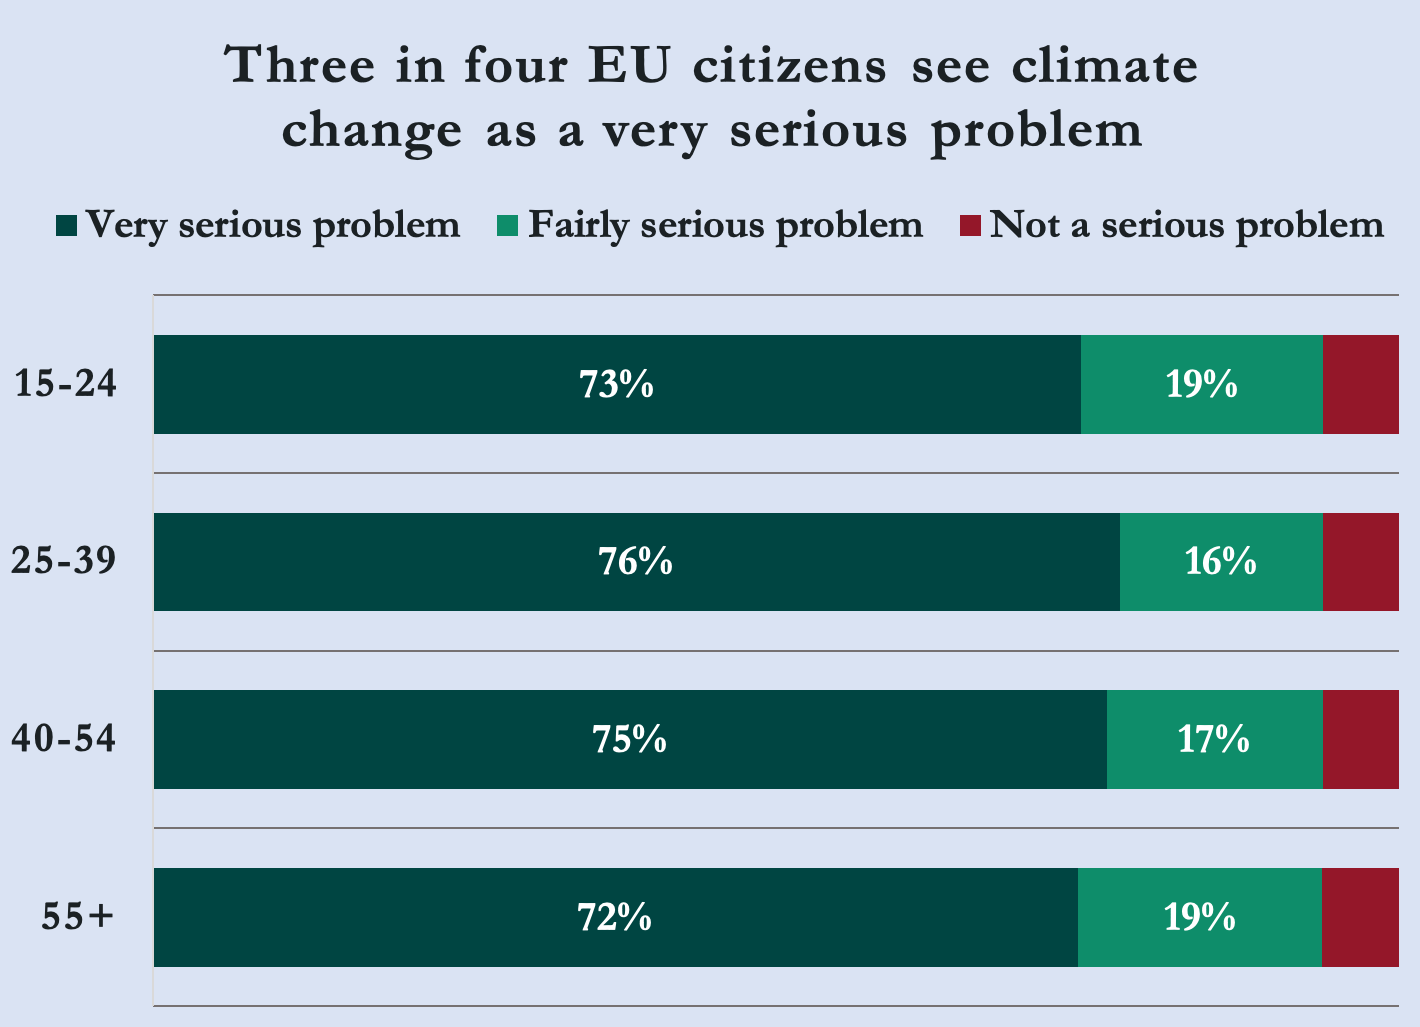 Perceptions of climate change seriousness